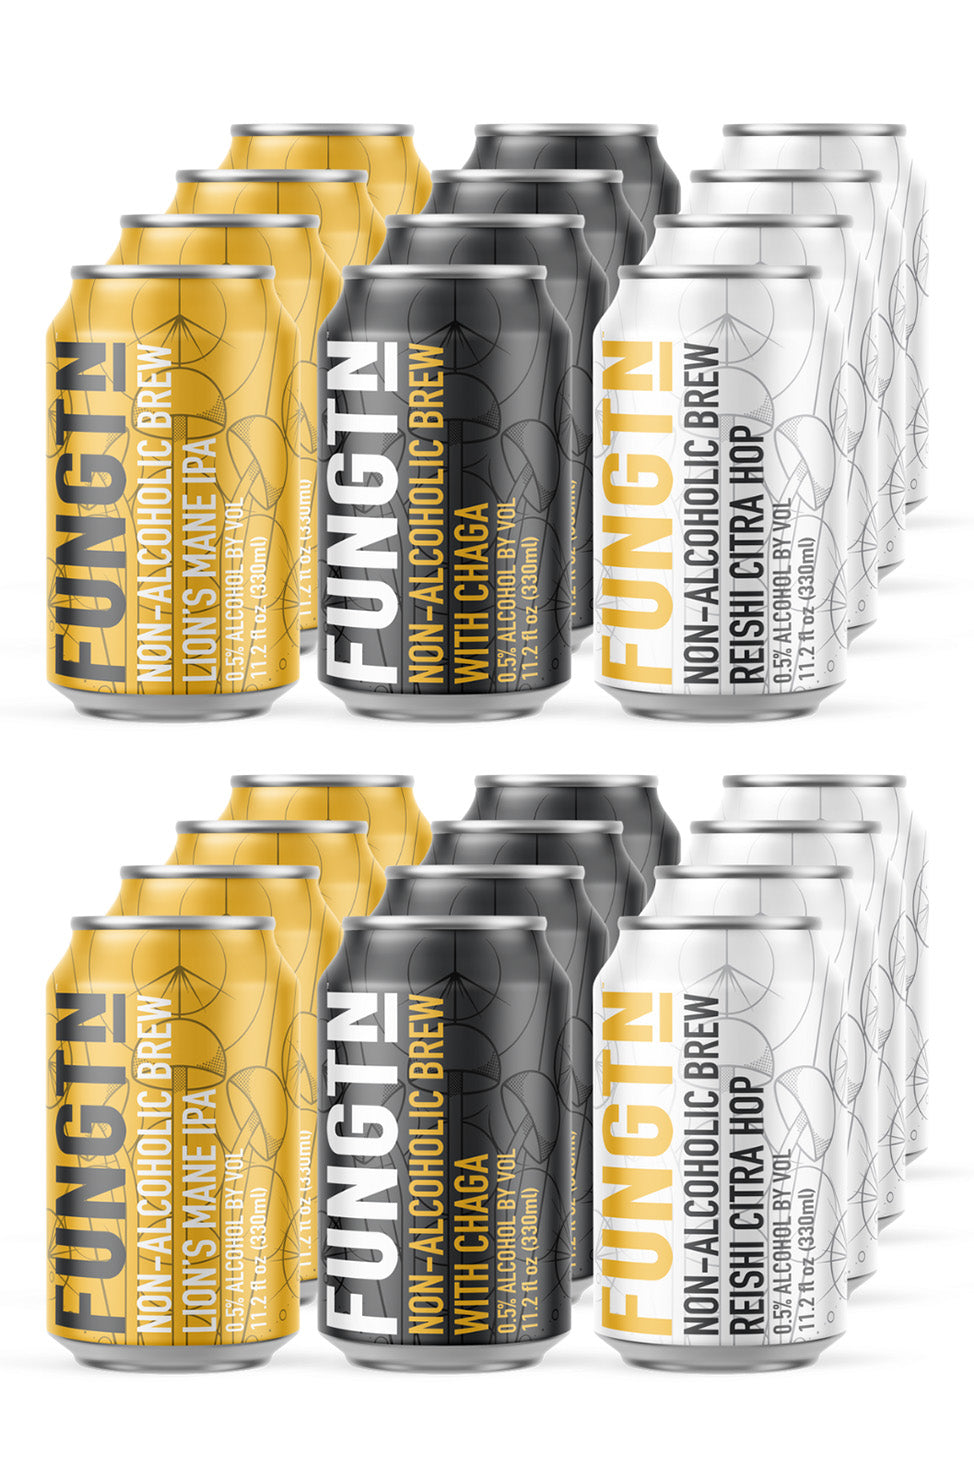 Fungtn Beer Bundle - Non Alcoholic Beer 24-pack